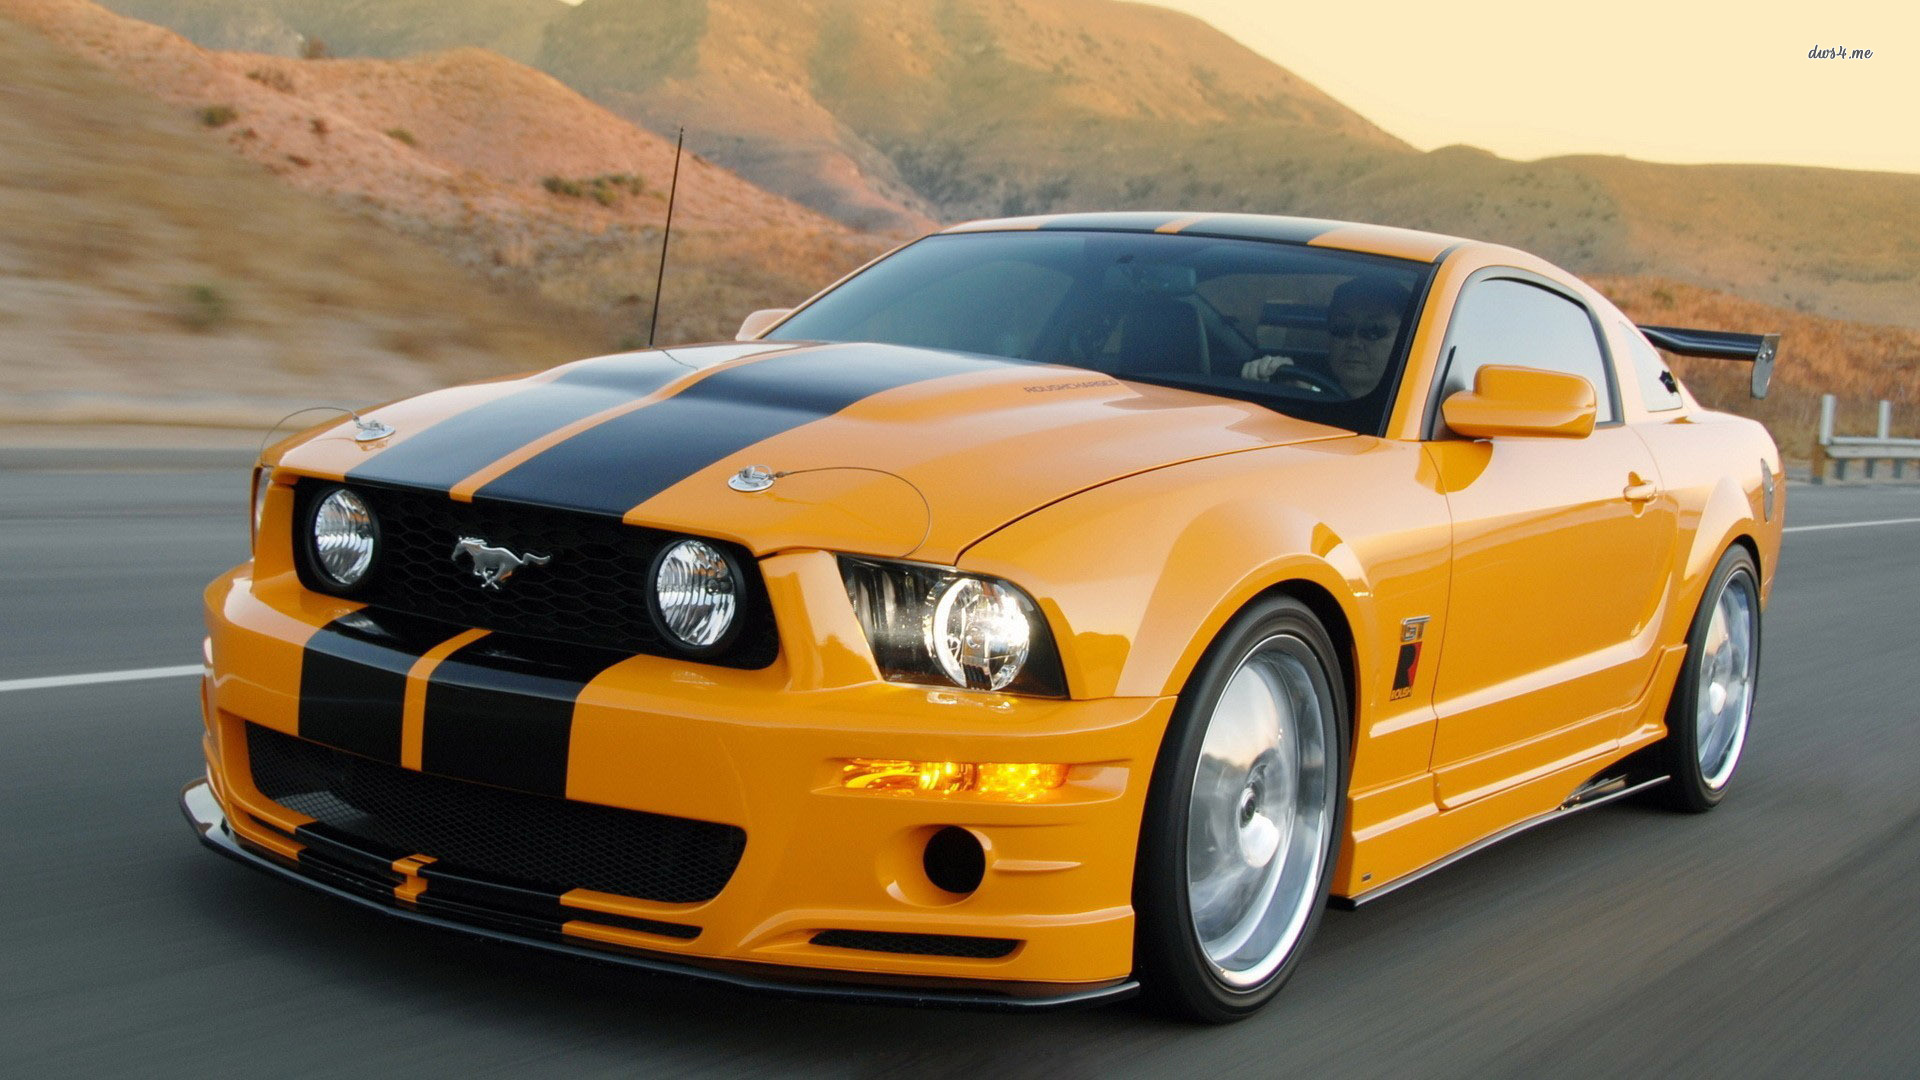 Ford Mustang Gtr Yellow Wallpaper Syera Sites 1920x1080px